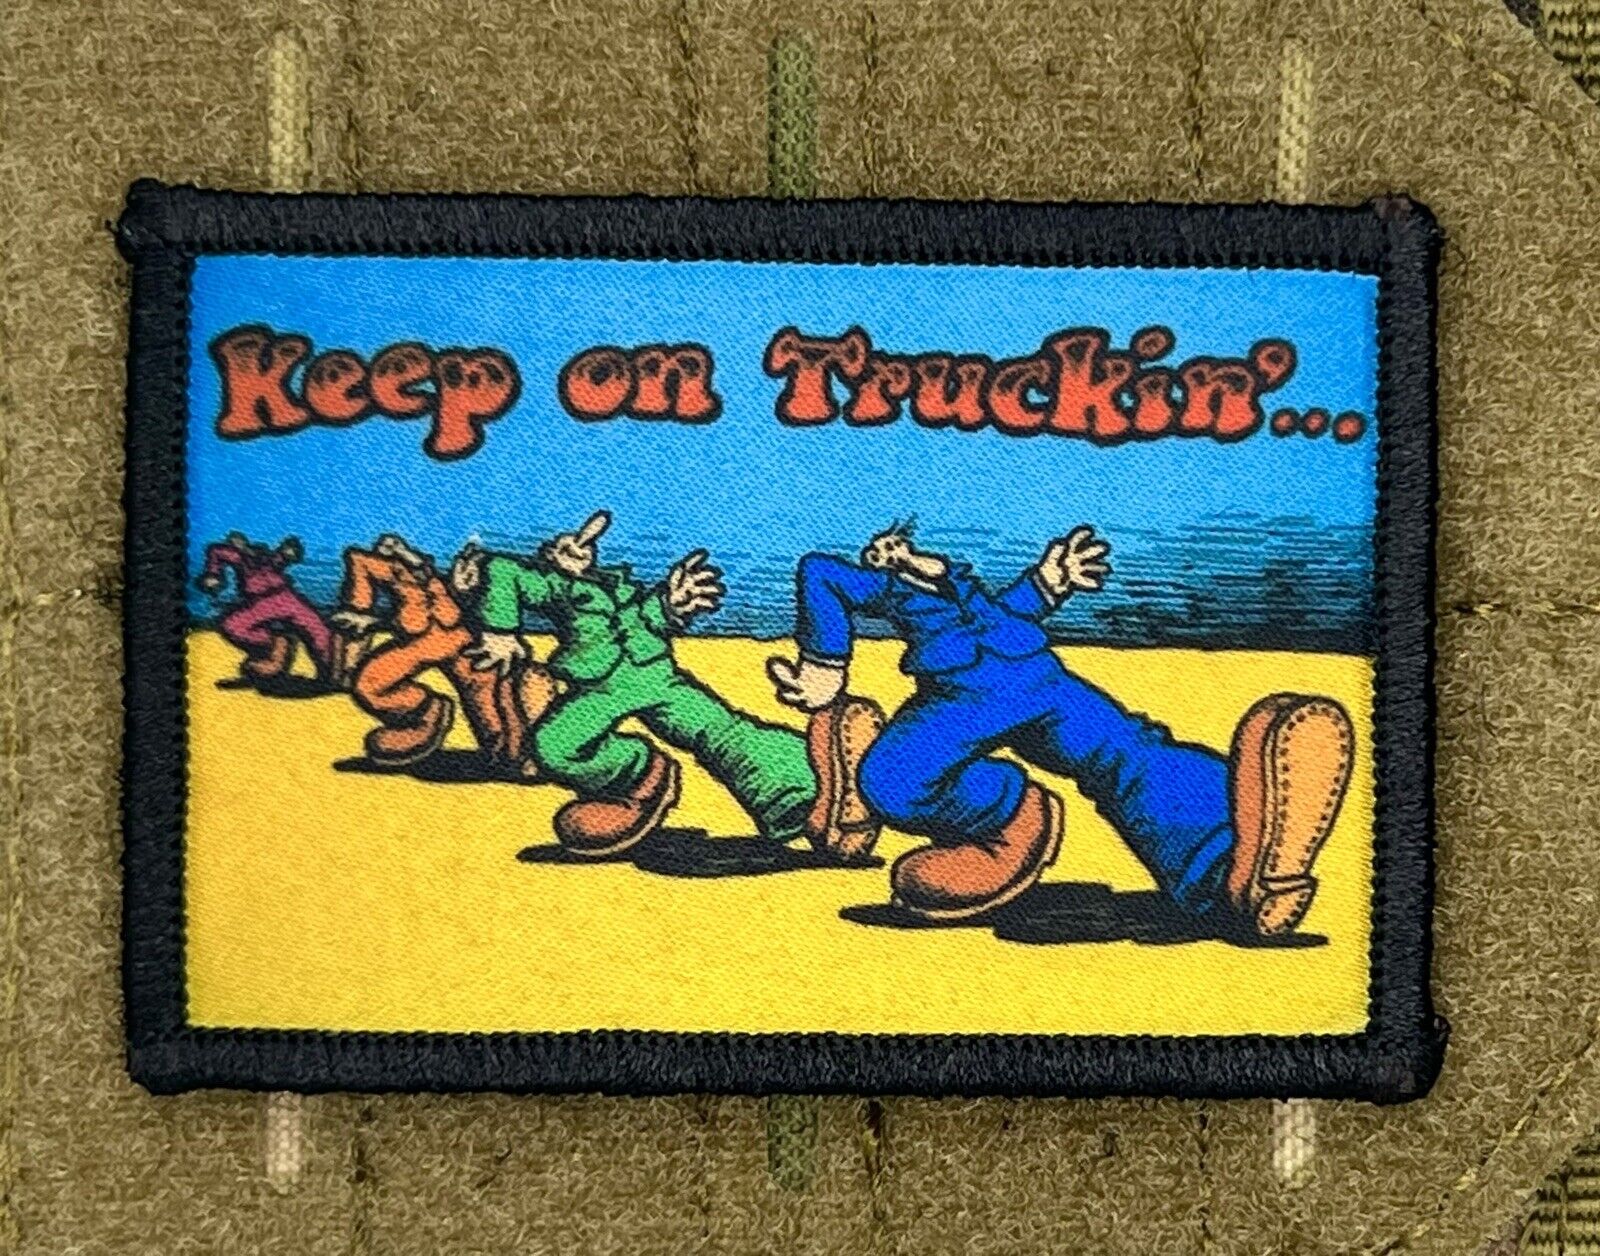 Keep On Truckin’ Morale Patch / Military ARMY Tactical  310